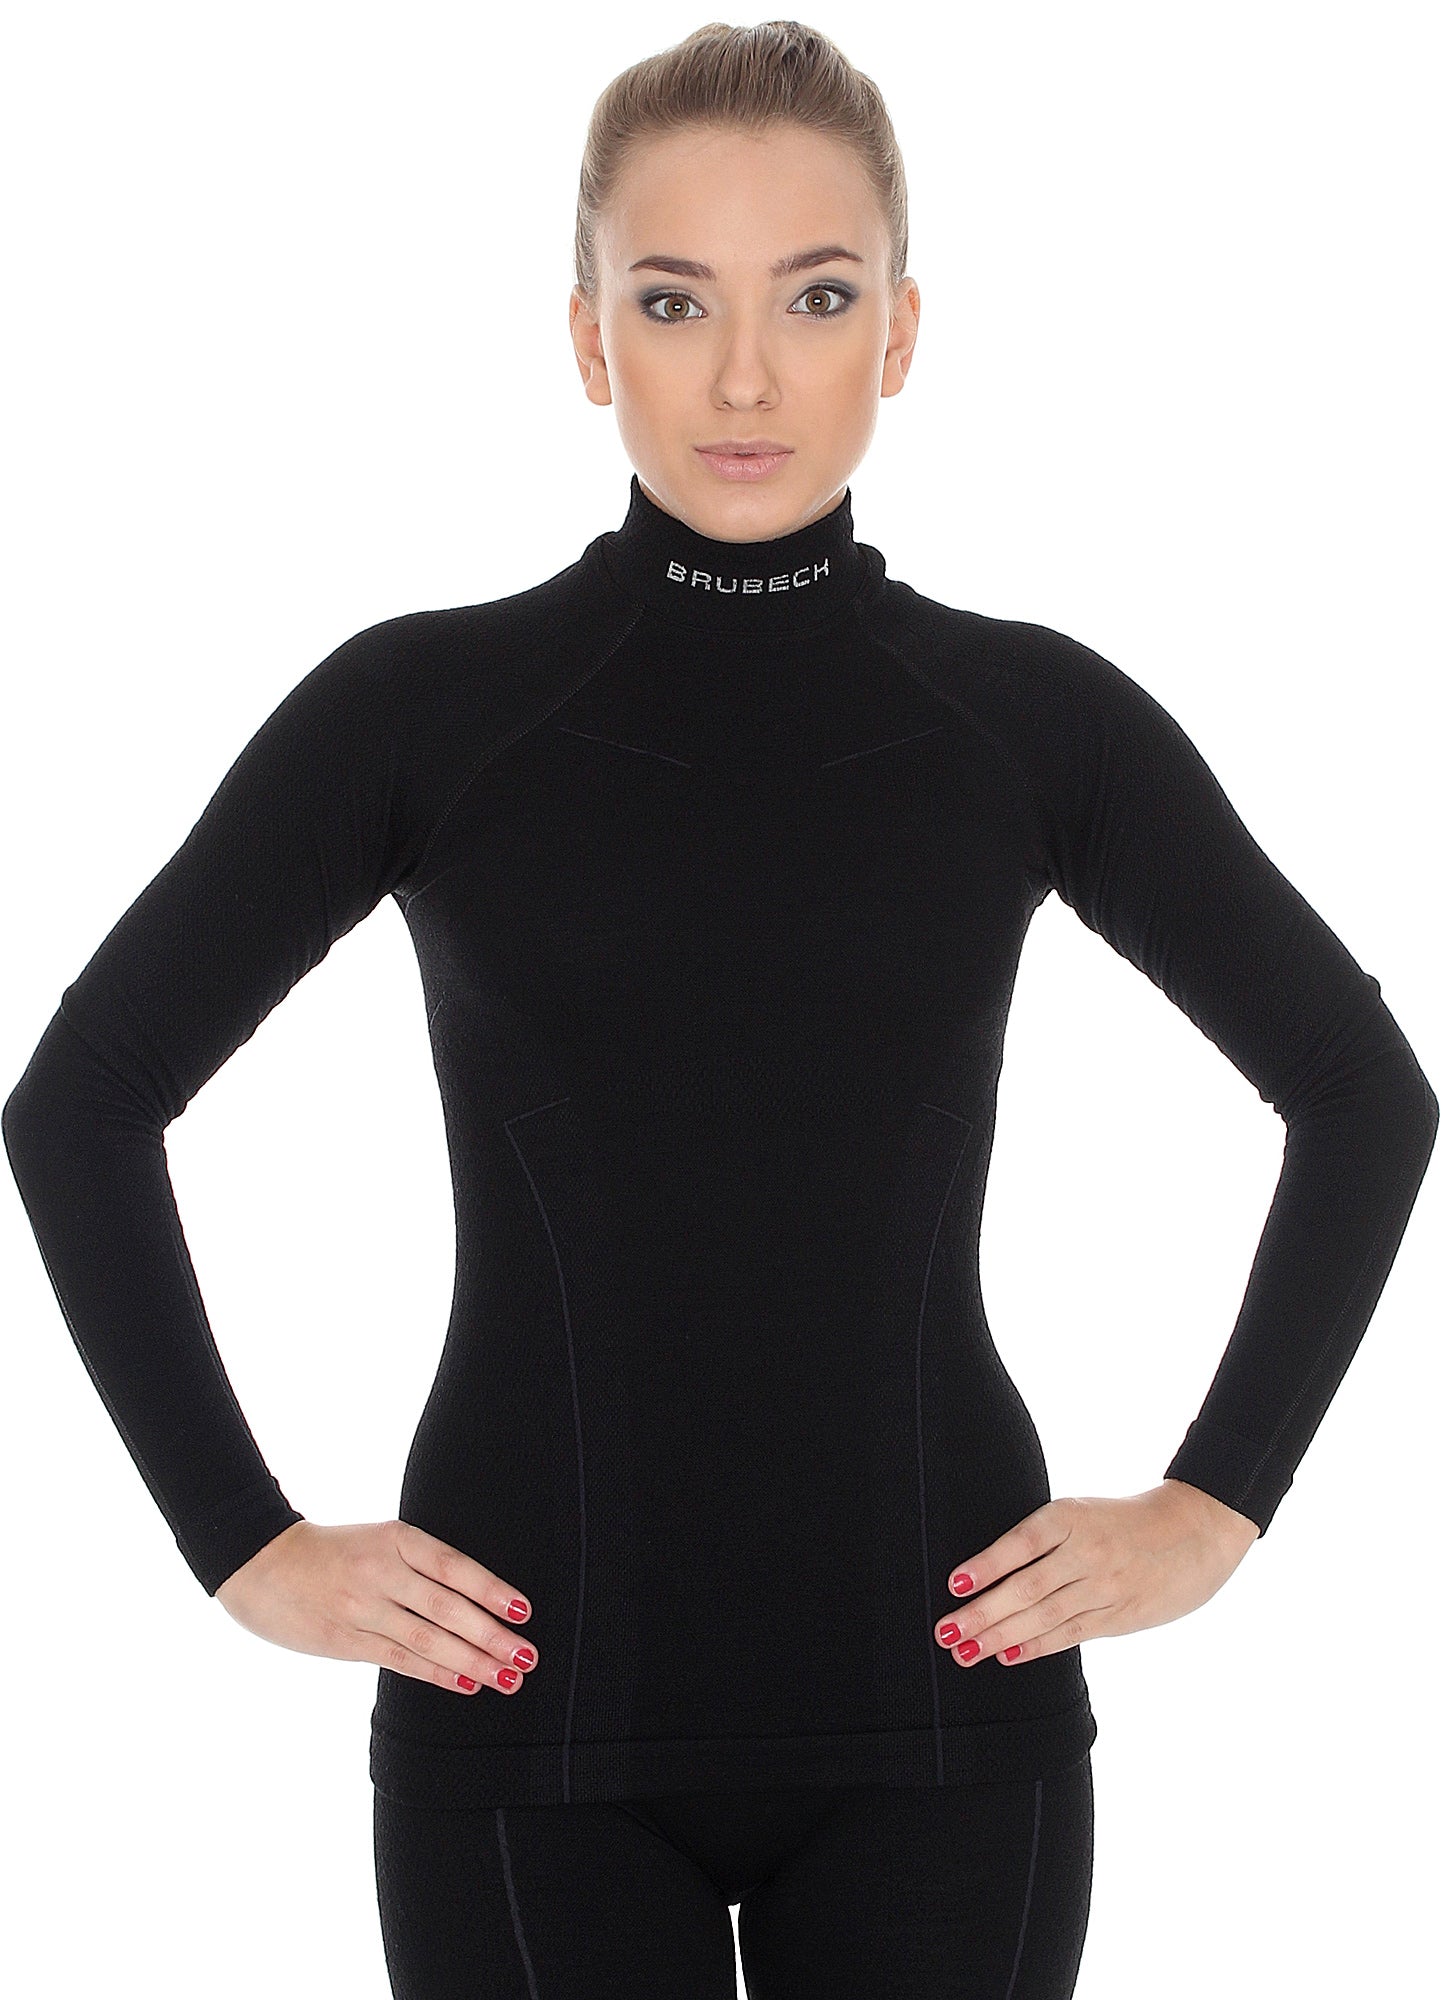 Solid Black women's EXTREME WOOL high-neck long-sleeve. Pictured from the front with matching EXTREME WOOL leggings